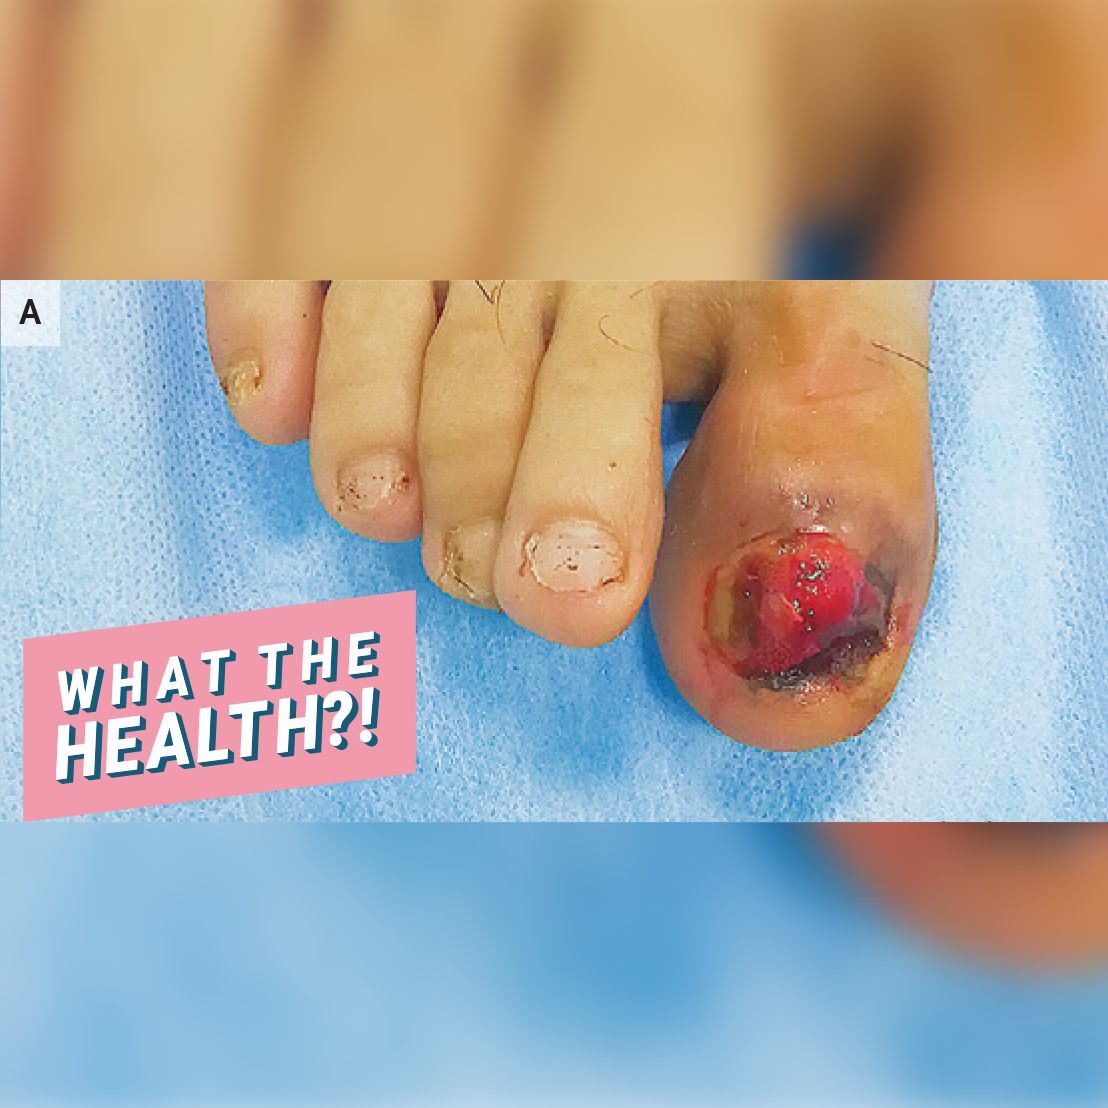 This Man's Toe Started Bleeding After Someone Stepped On It&mdash;But It Turned Out to Be a Symptom of Melanoma